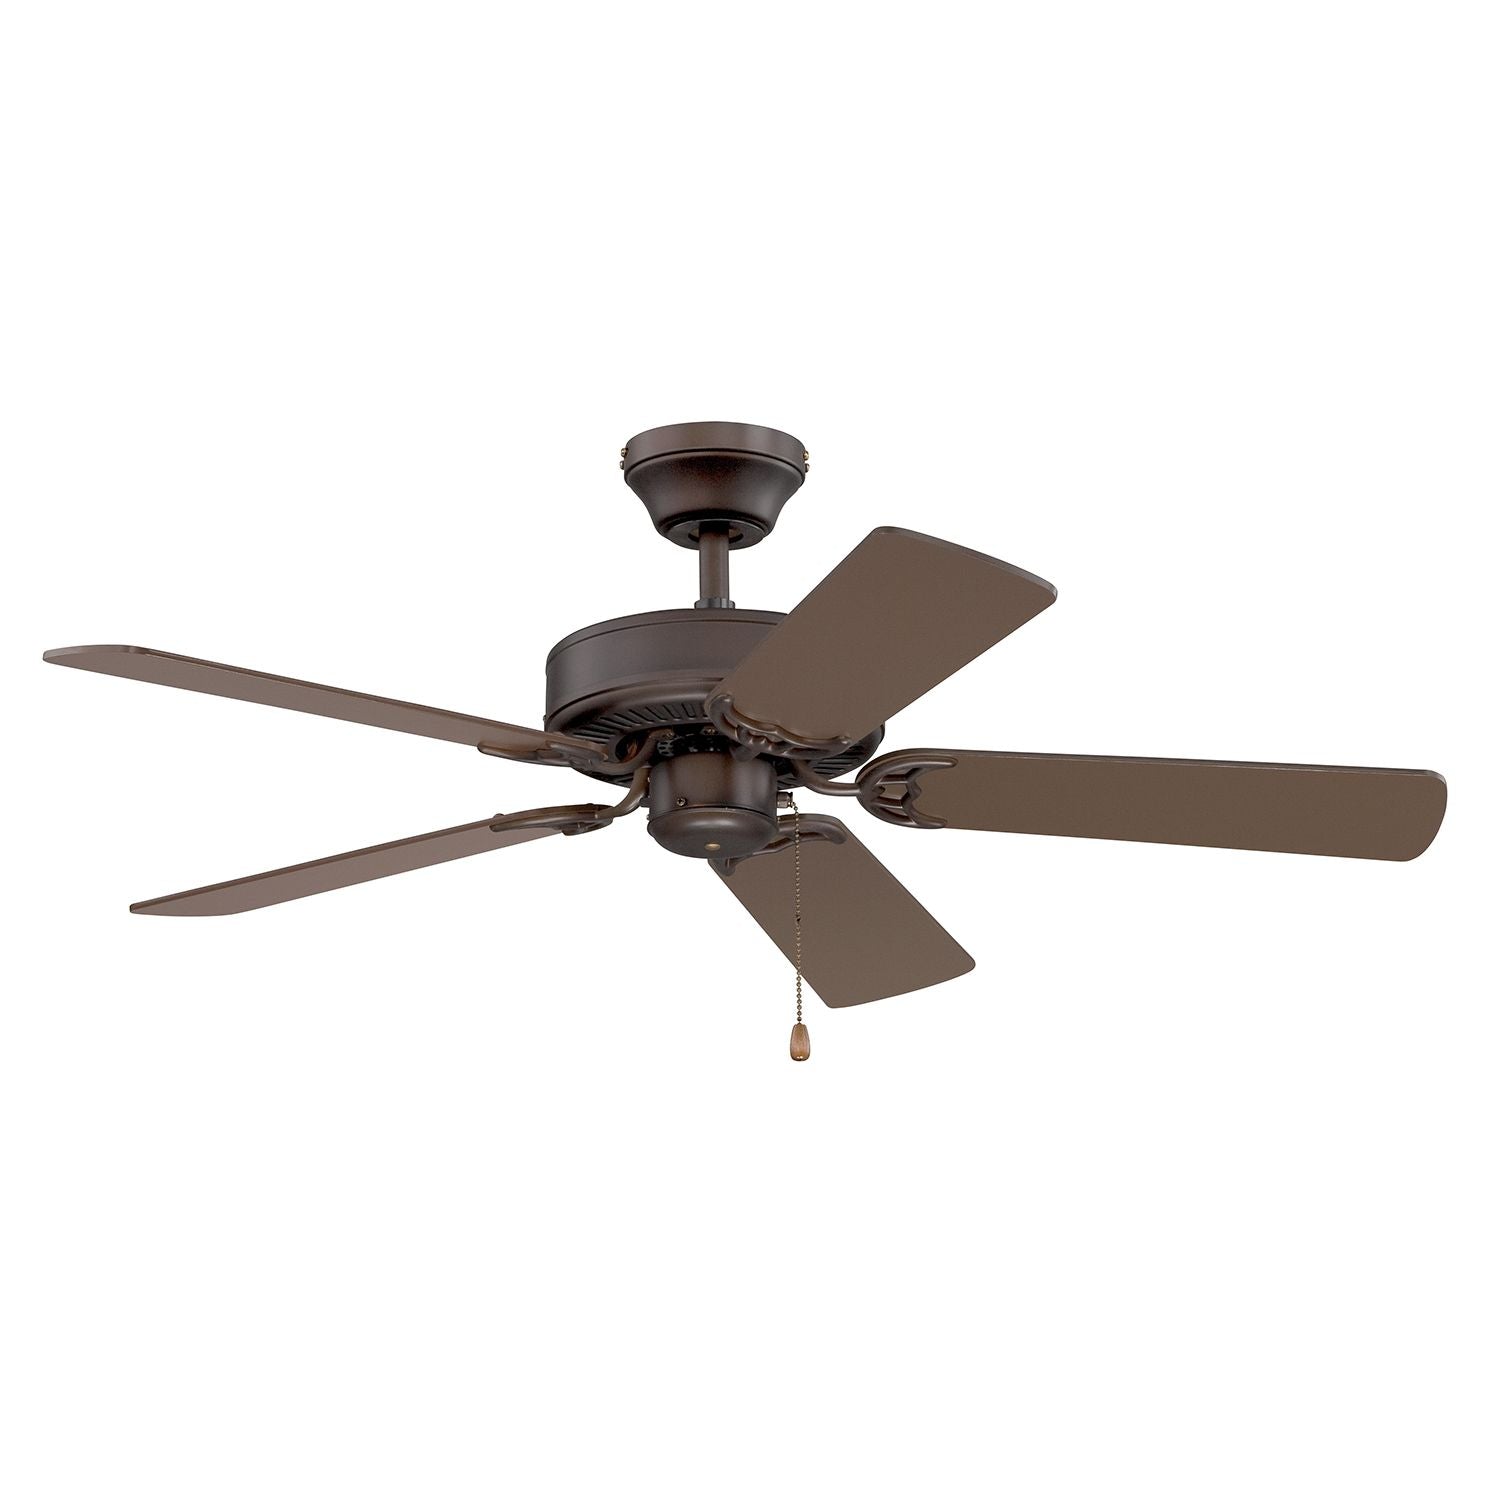 Builder'S Choice Ceiling Fan Oil Rubbed Bronze with matching blades